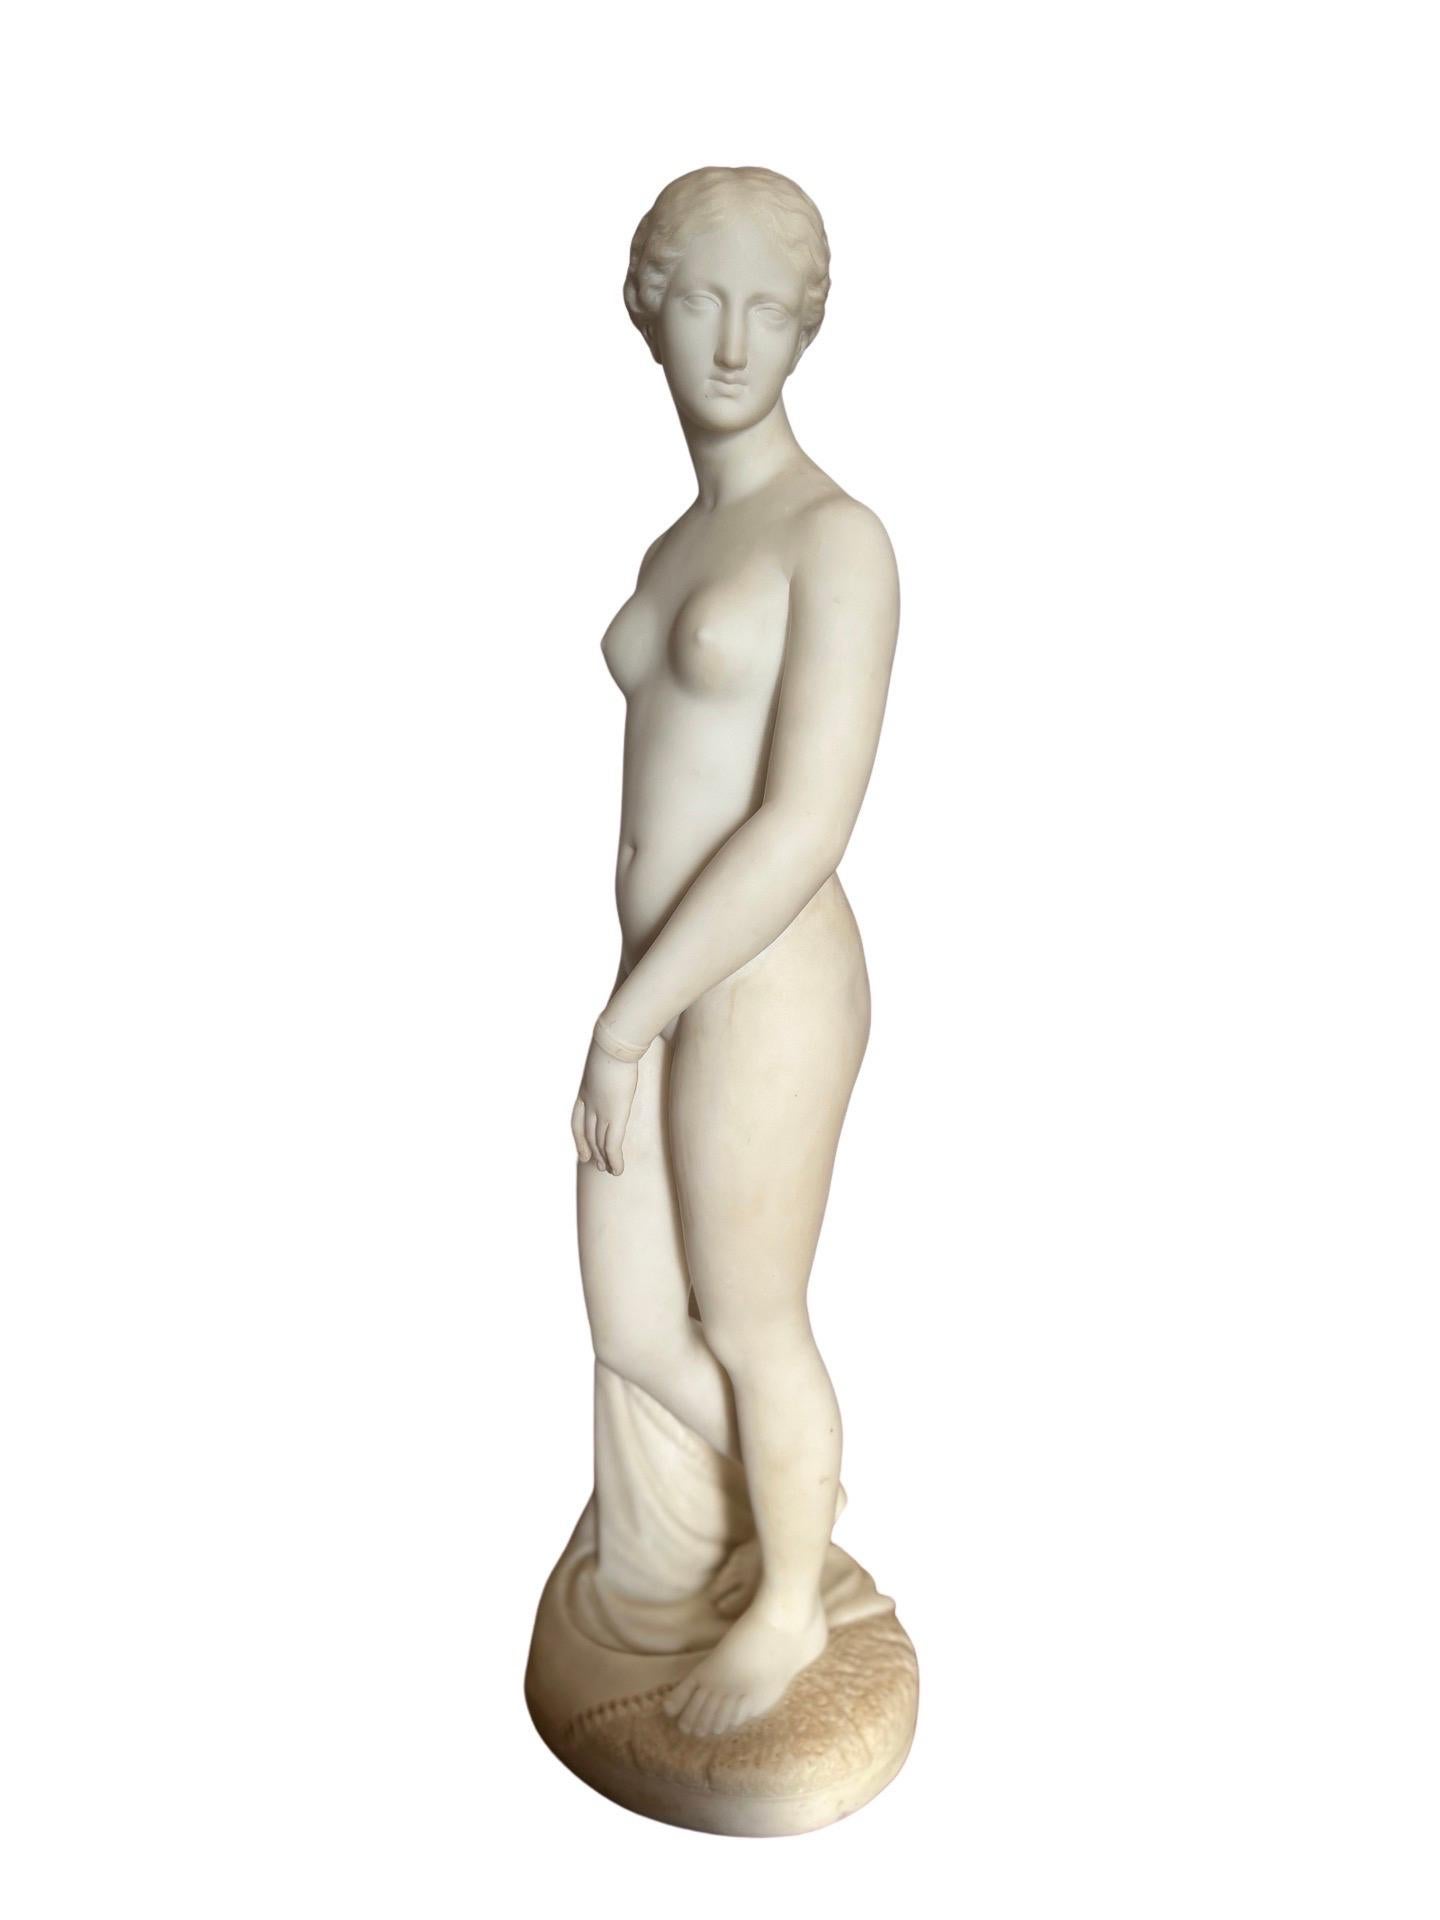 Carrara Marble After Hiram Powers, Grand Tour Marble Sculpture of “the Greek Slave” For Sale